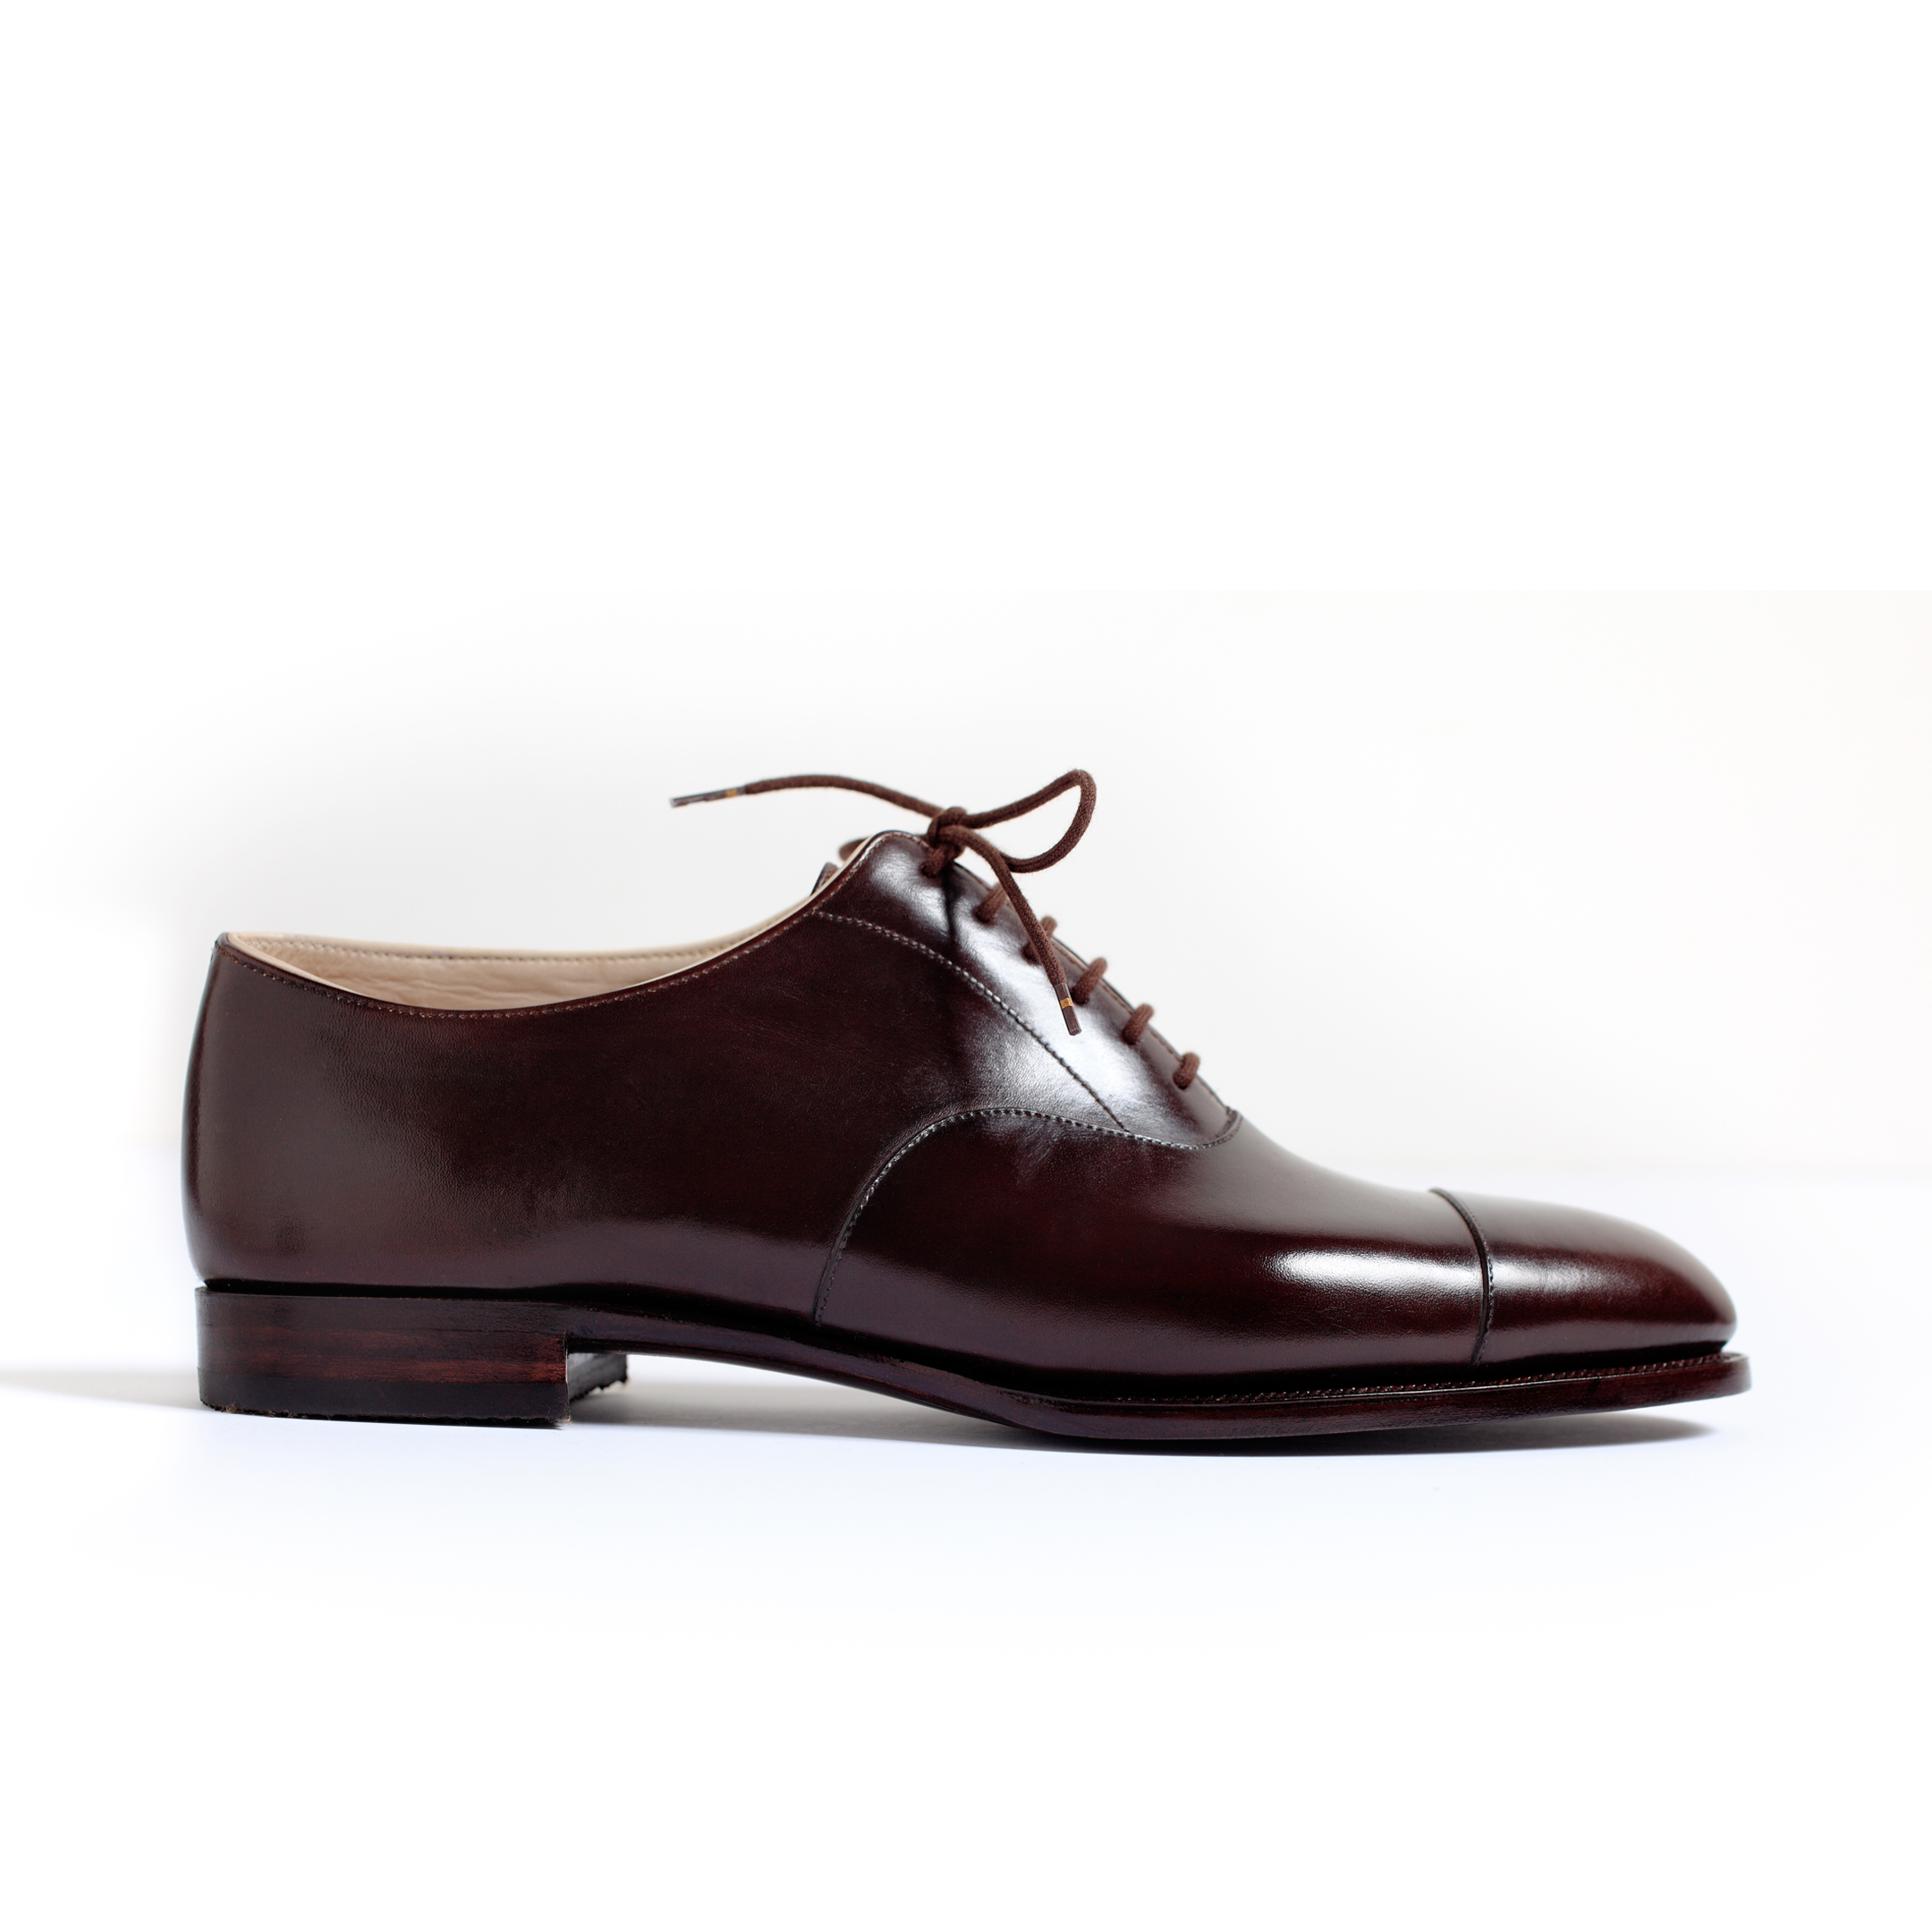 Bespoke Shoes - Scheer GmbH | Pure and focused - following up 7 ...